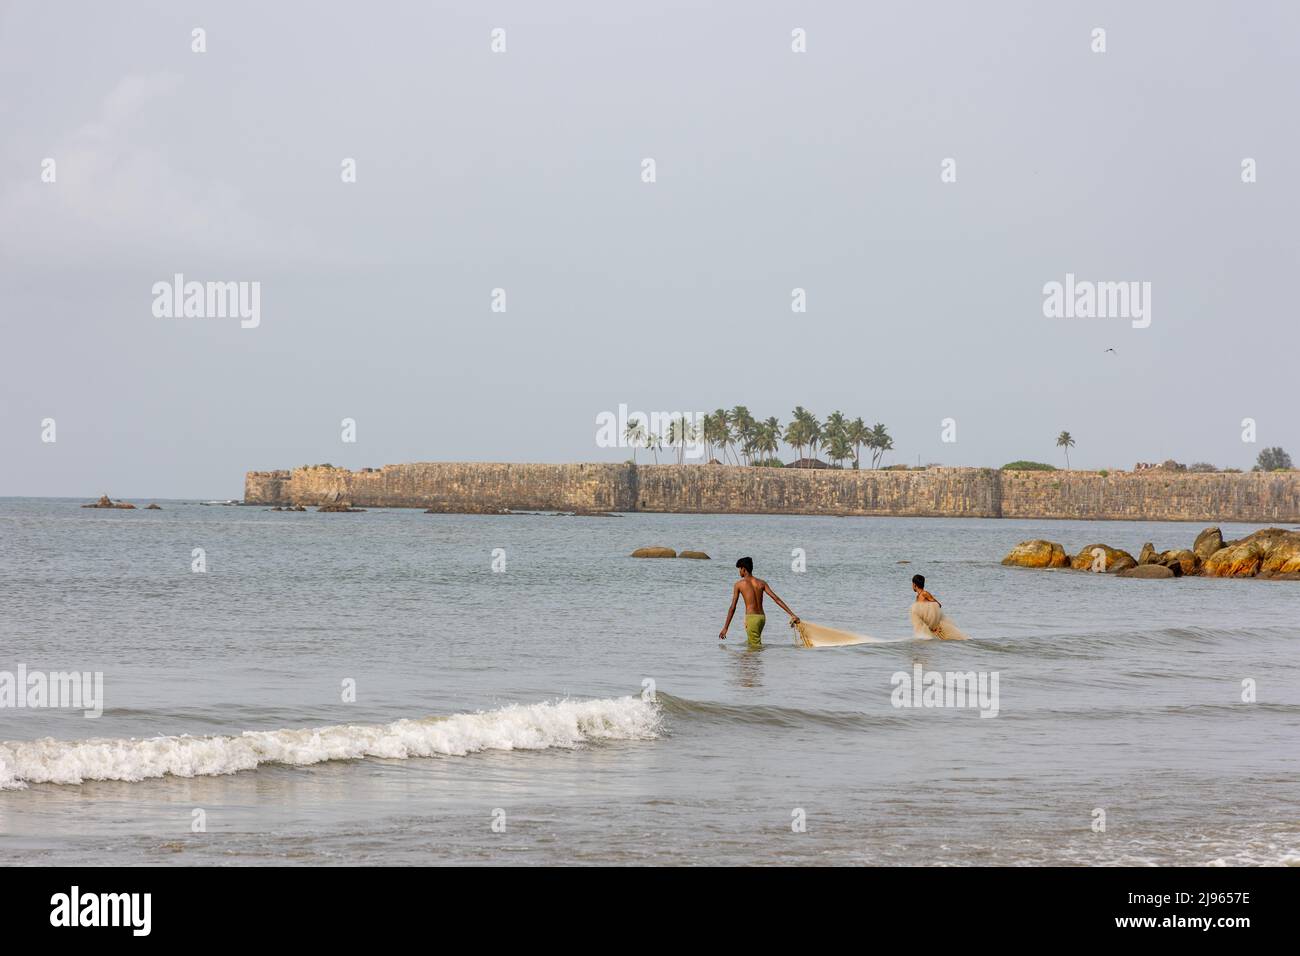 Two fishermen venturing into the sea to lay fishing nets while the massive stone wall of Sindhudurg Fort is seen in the background Stock Photo